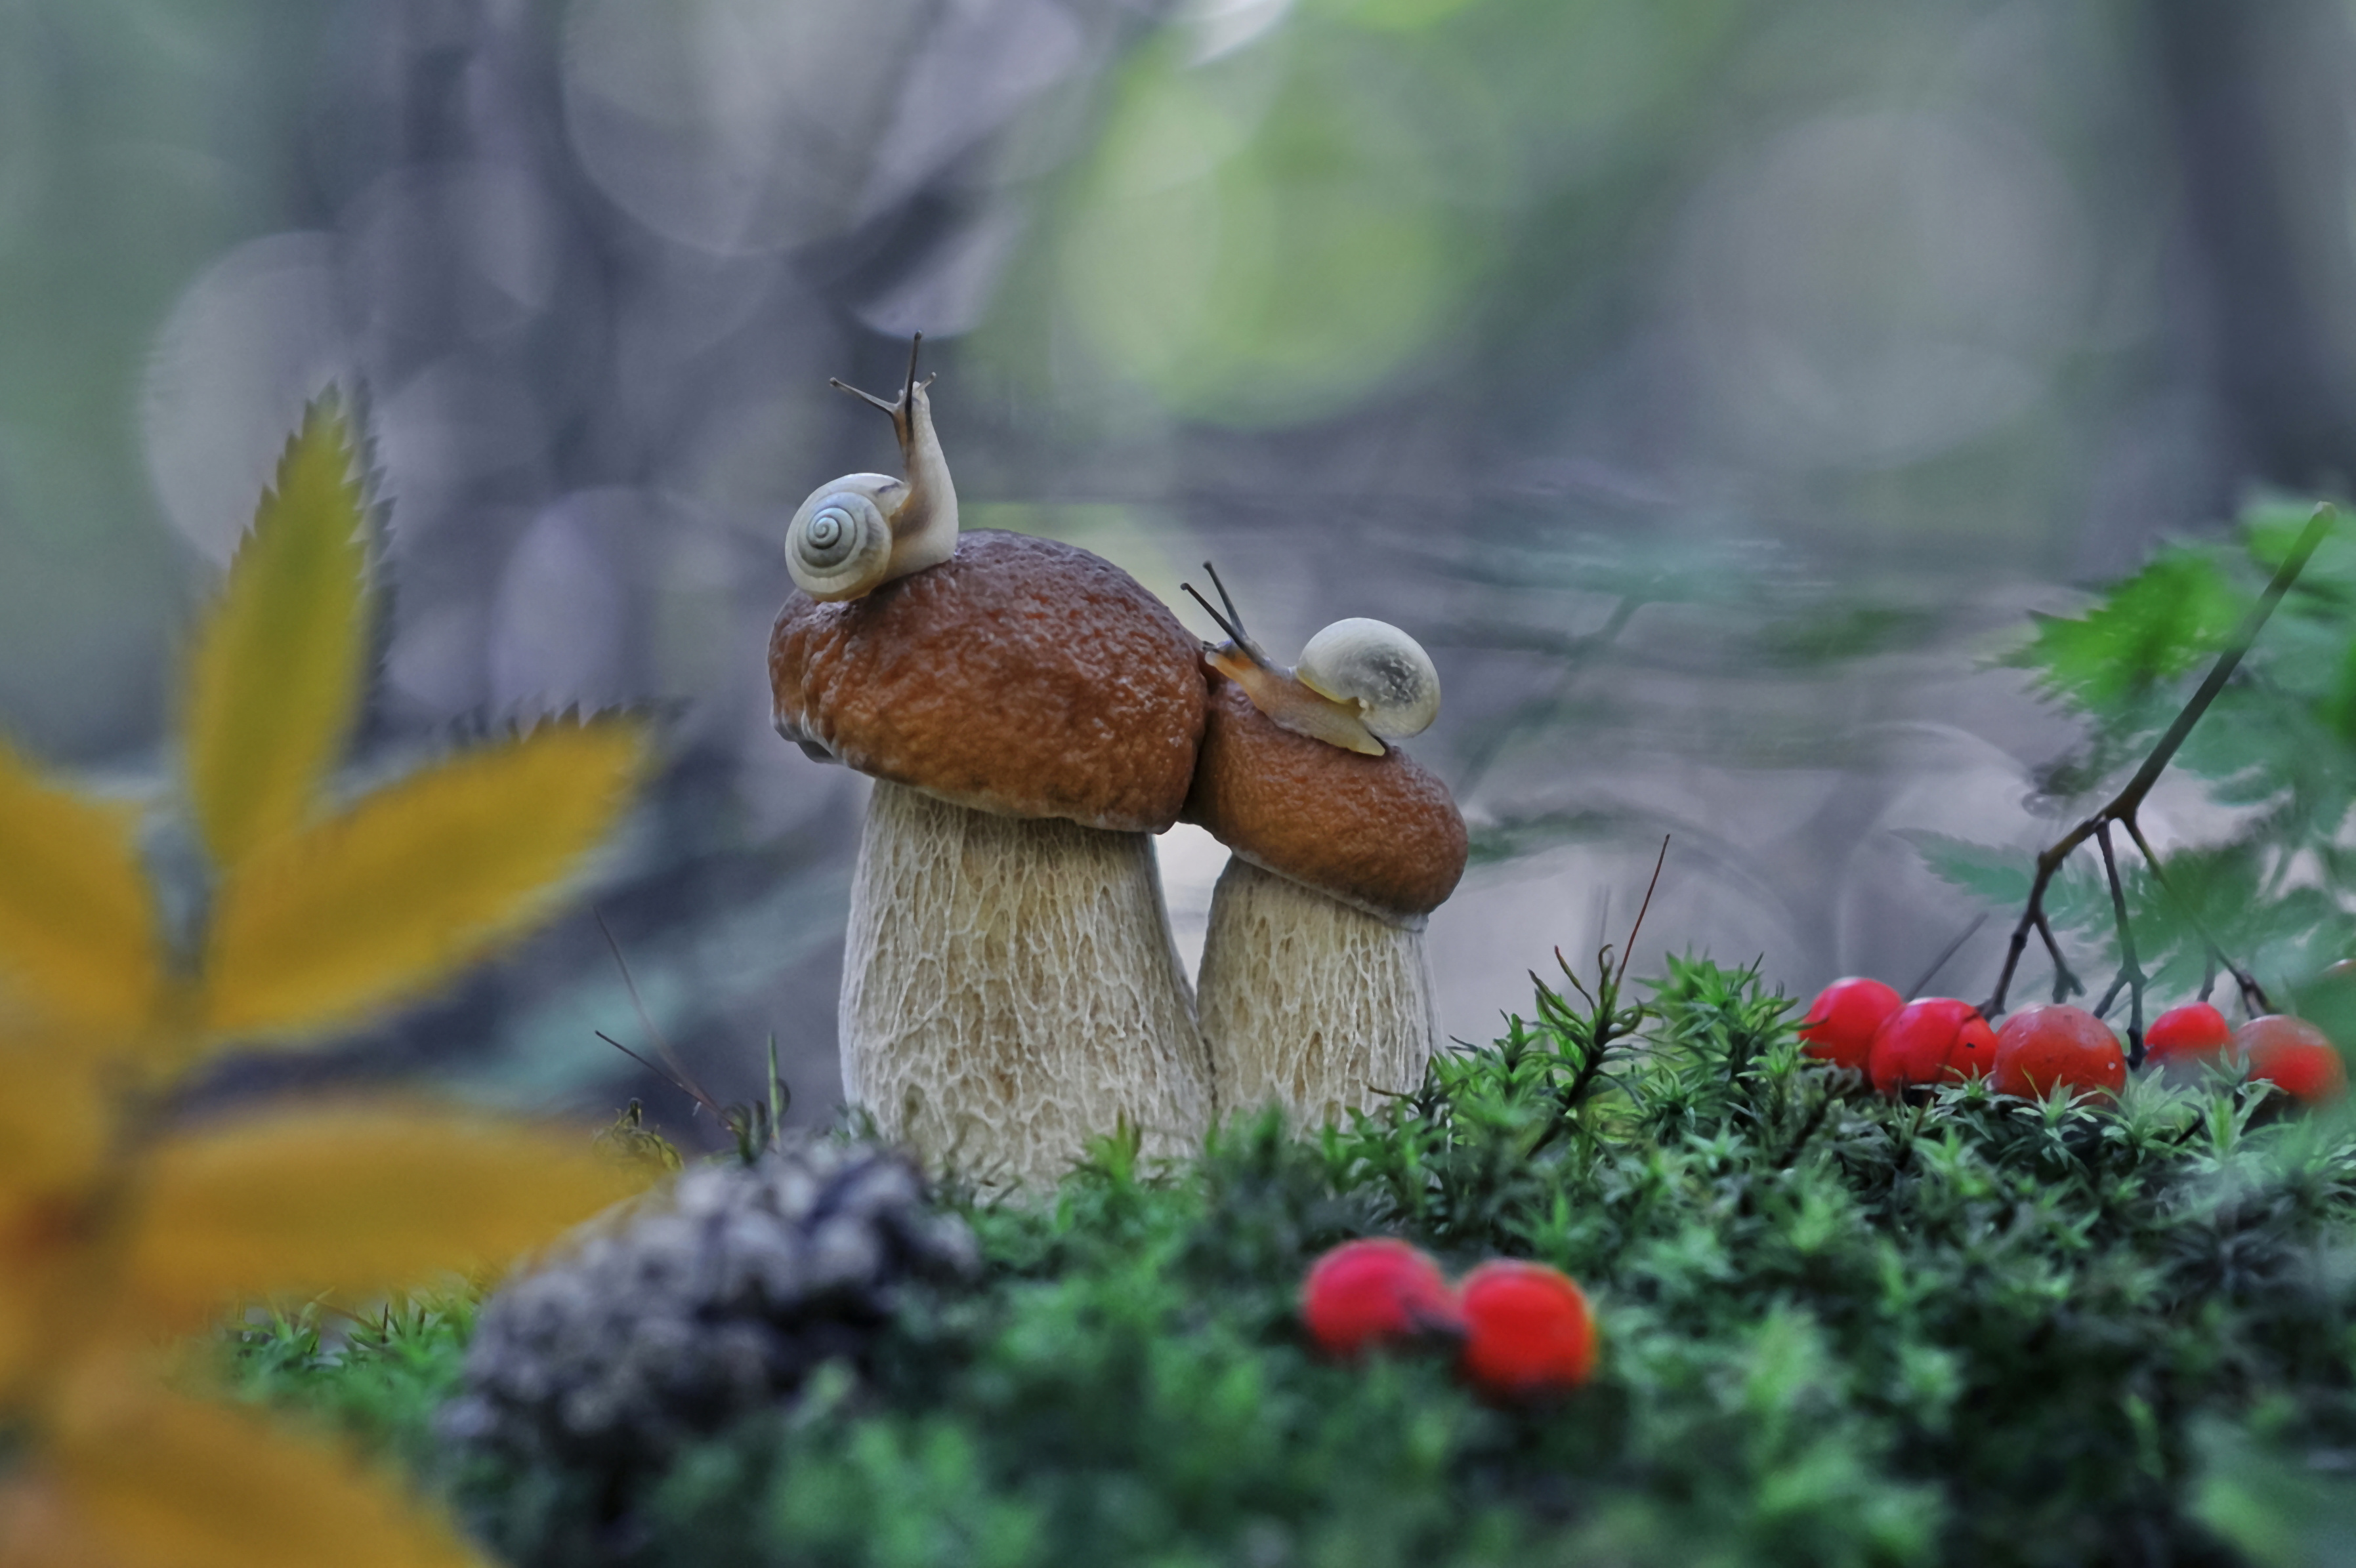 Snail And Mushroom Photography Wallpapers